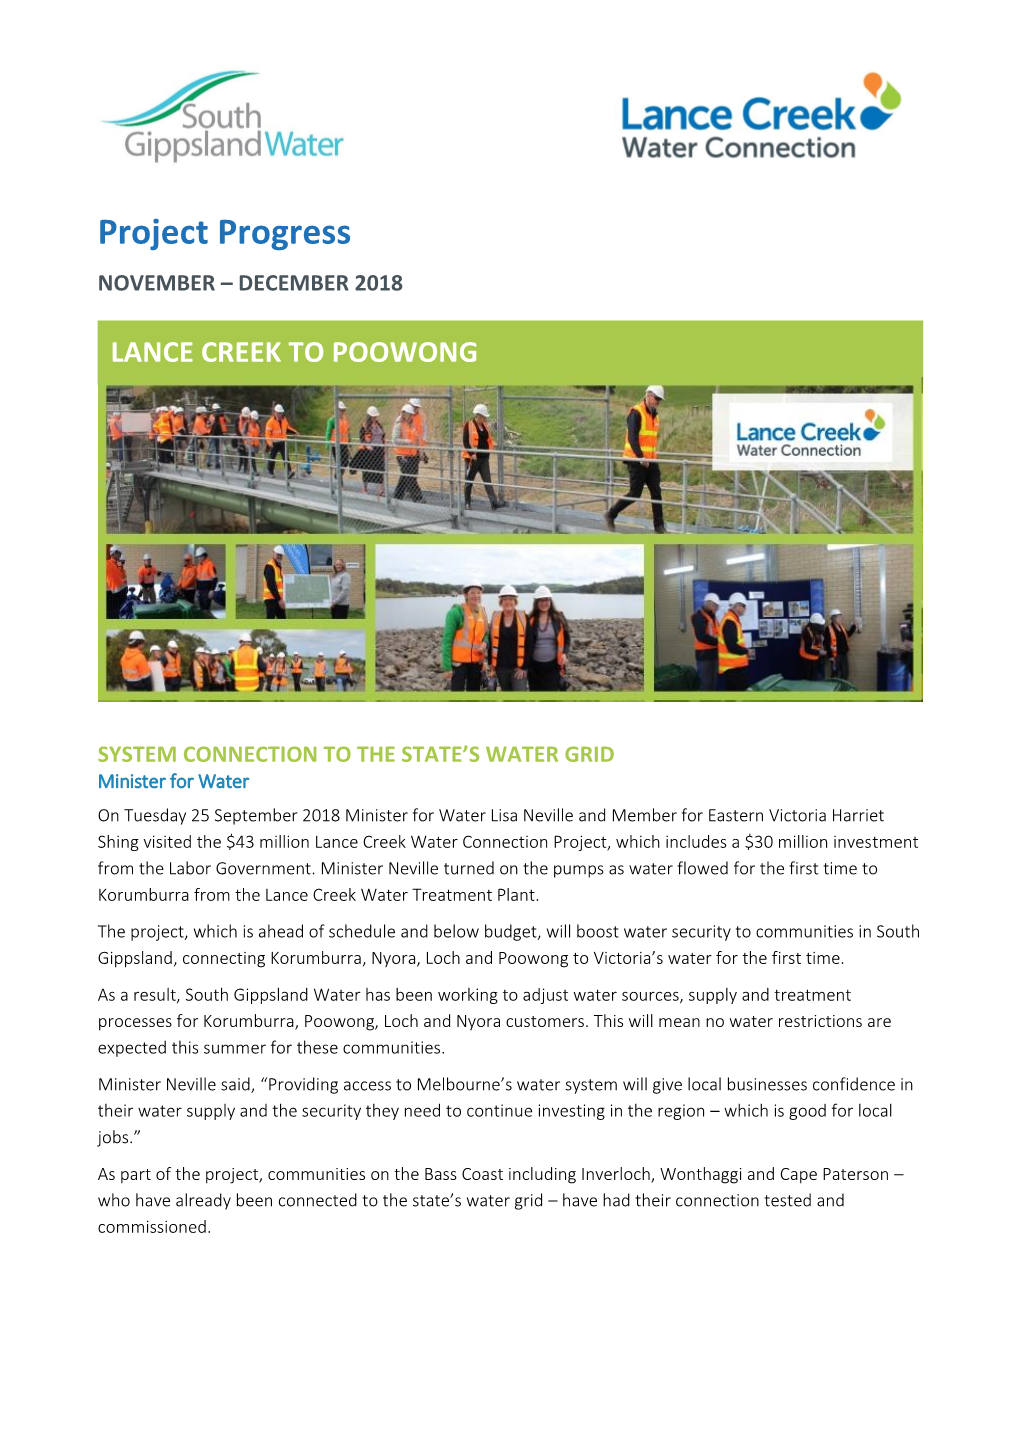 Lance Creek Water Connection Community